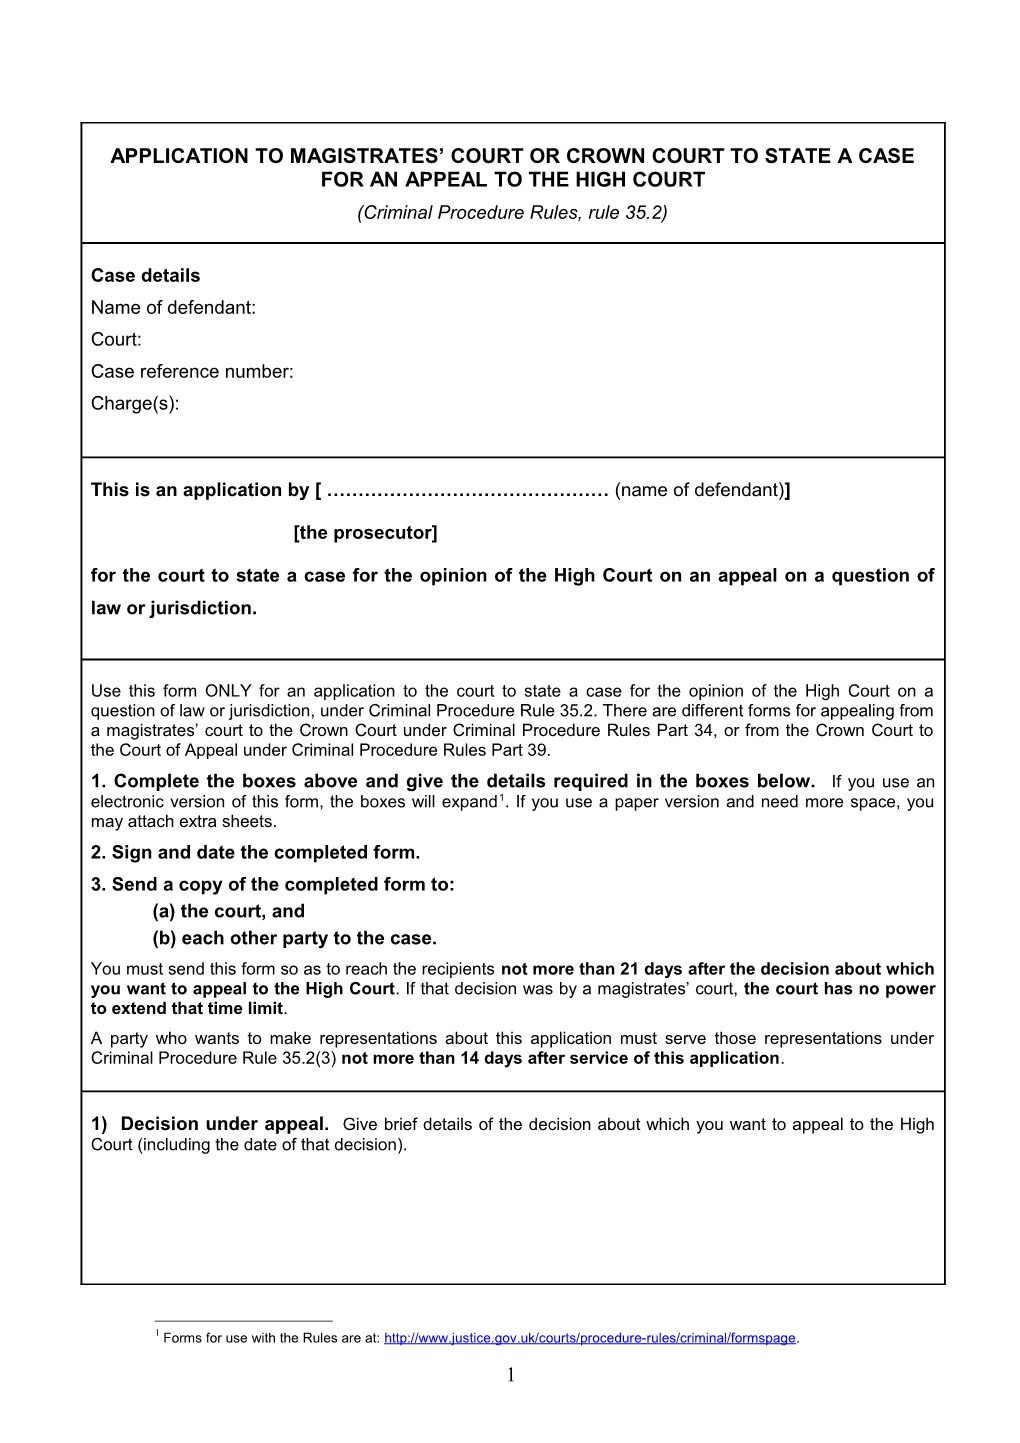 Application to Magistrates' Court Or Crown Court to State a Case for an Appeal to the High Court